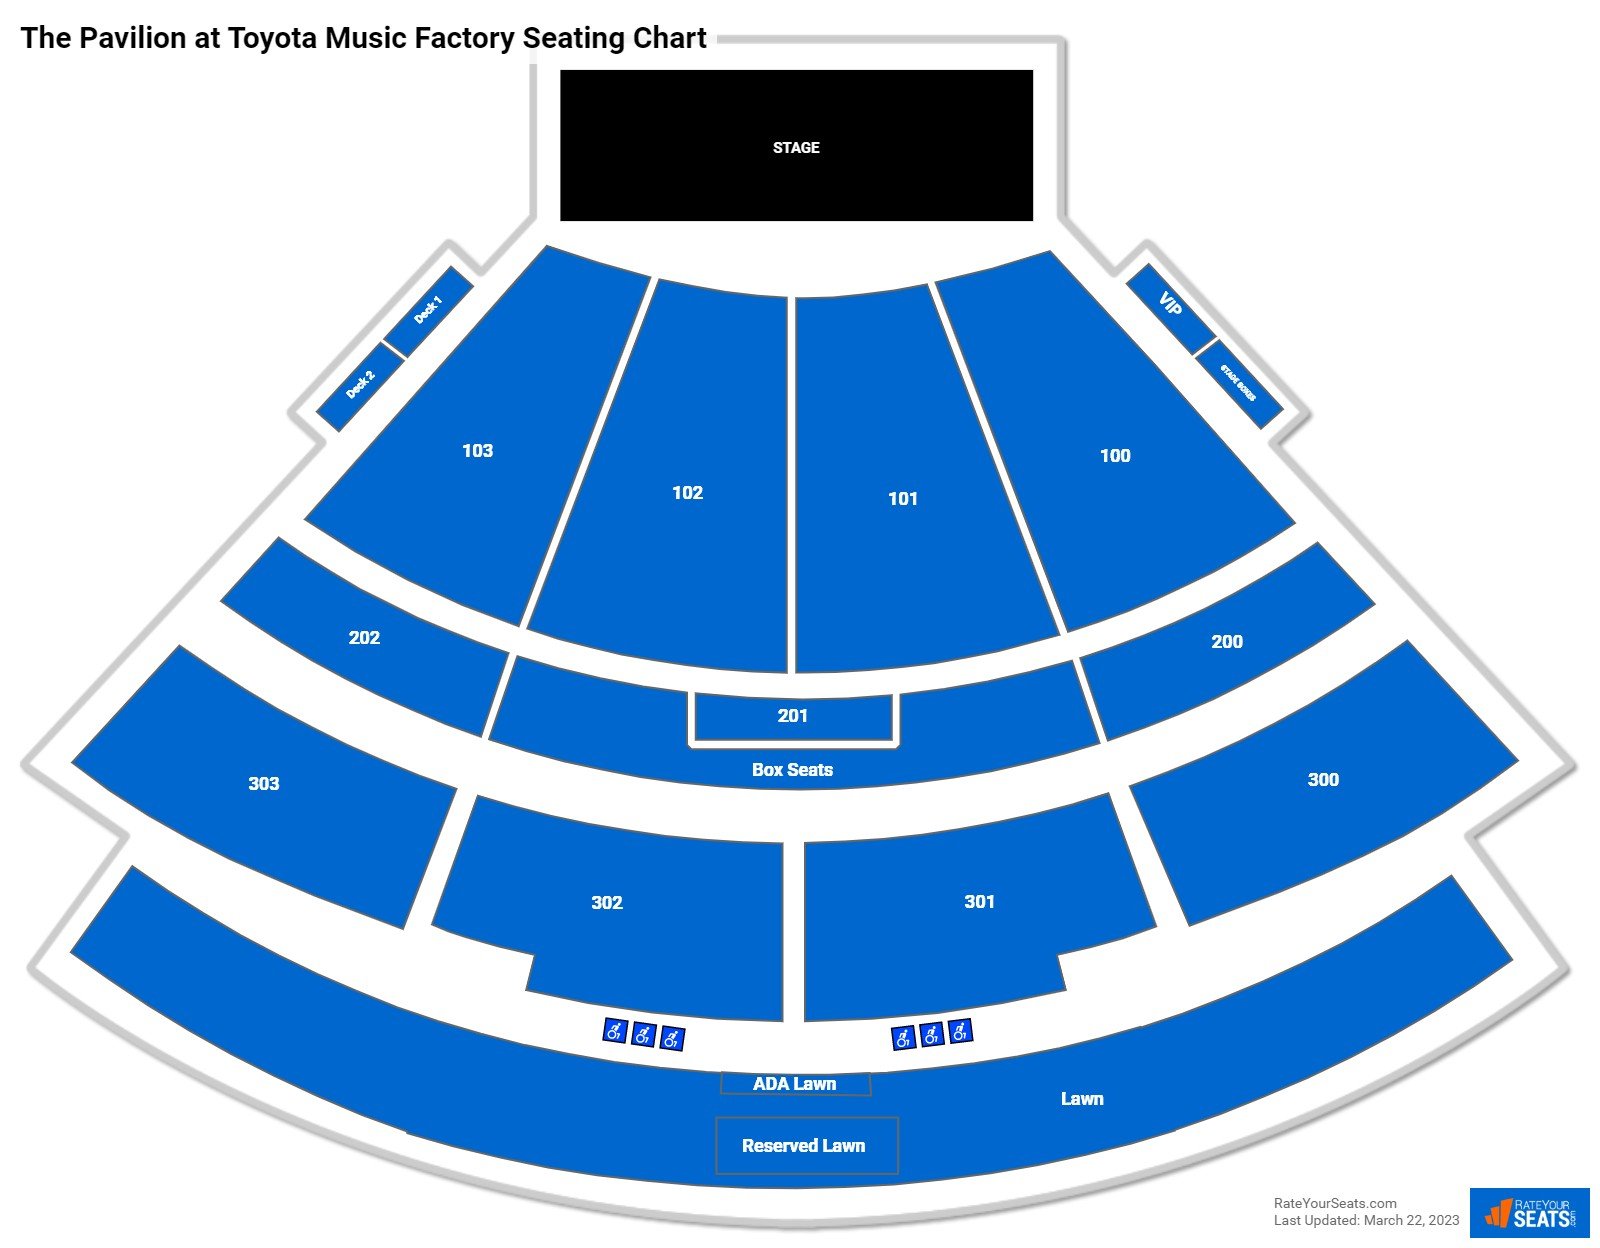 The Pavilion at Toyota Music Factory Concert Seating Chart